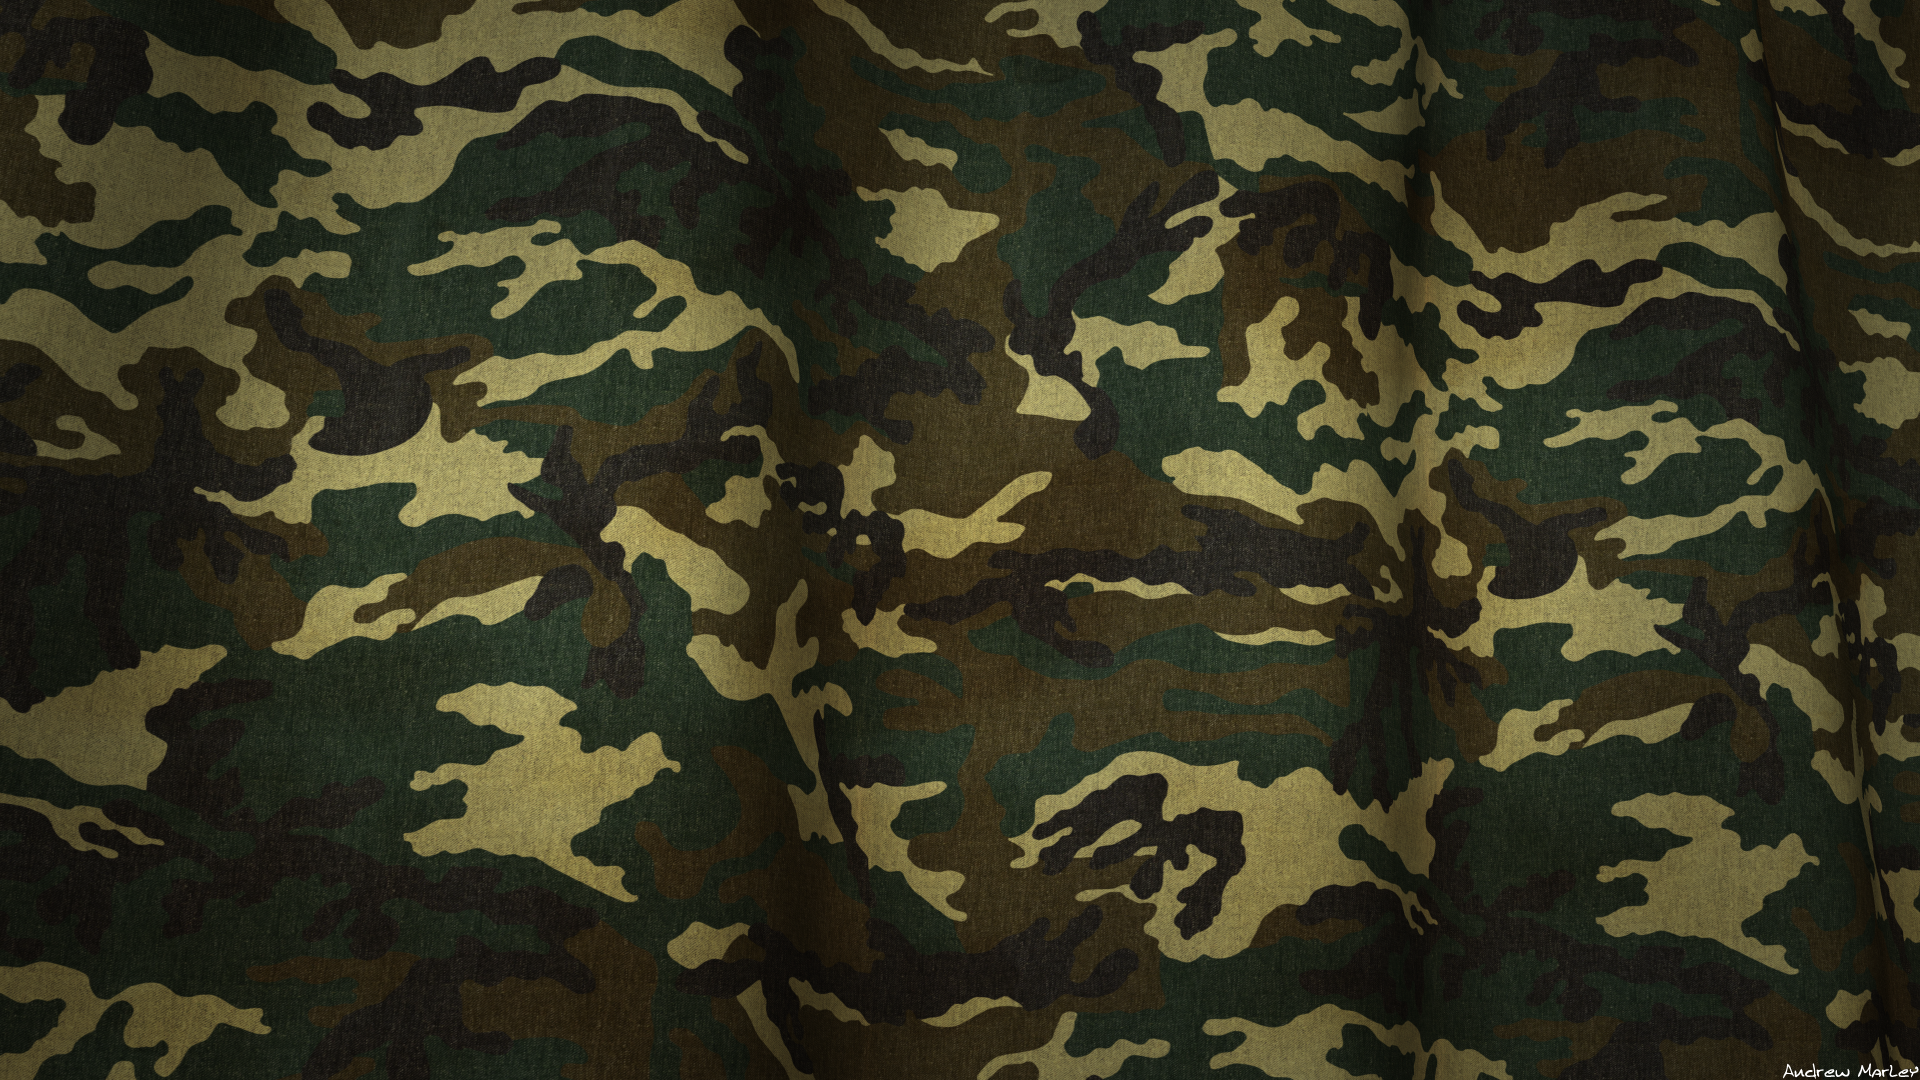 camouflage wallpaper,military camouflage,camouflage,pattern,clothing,uniform